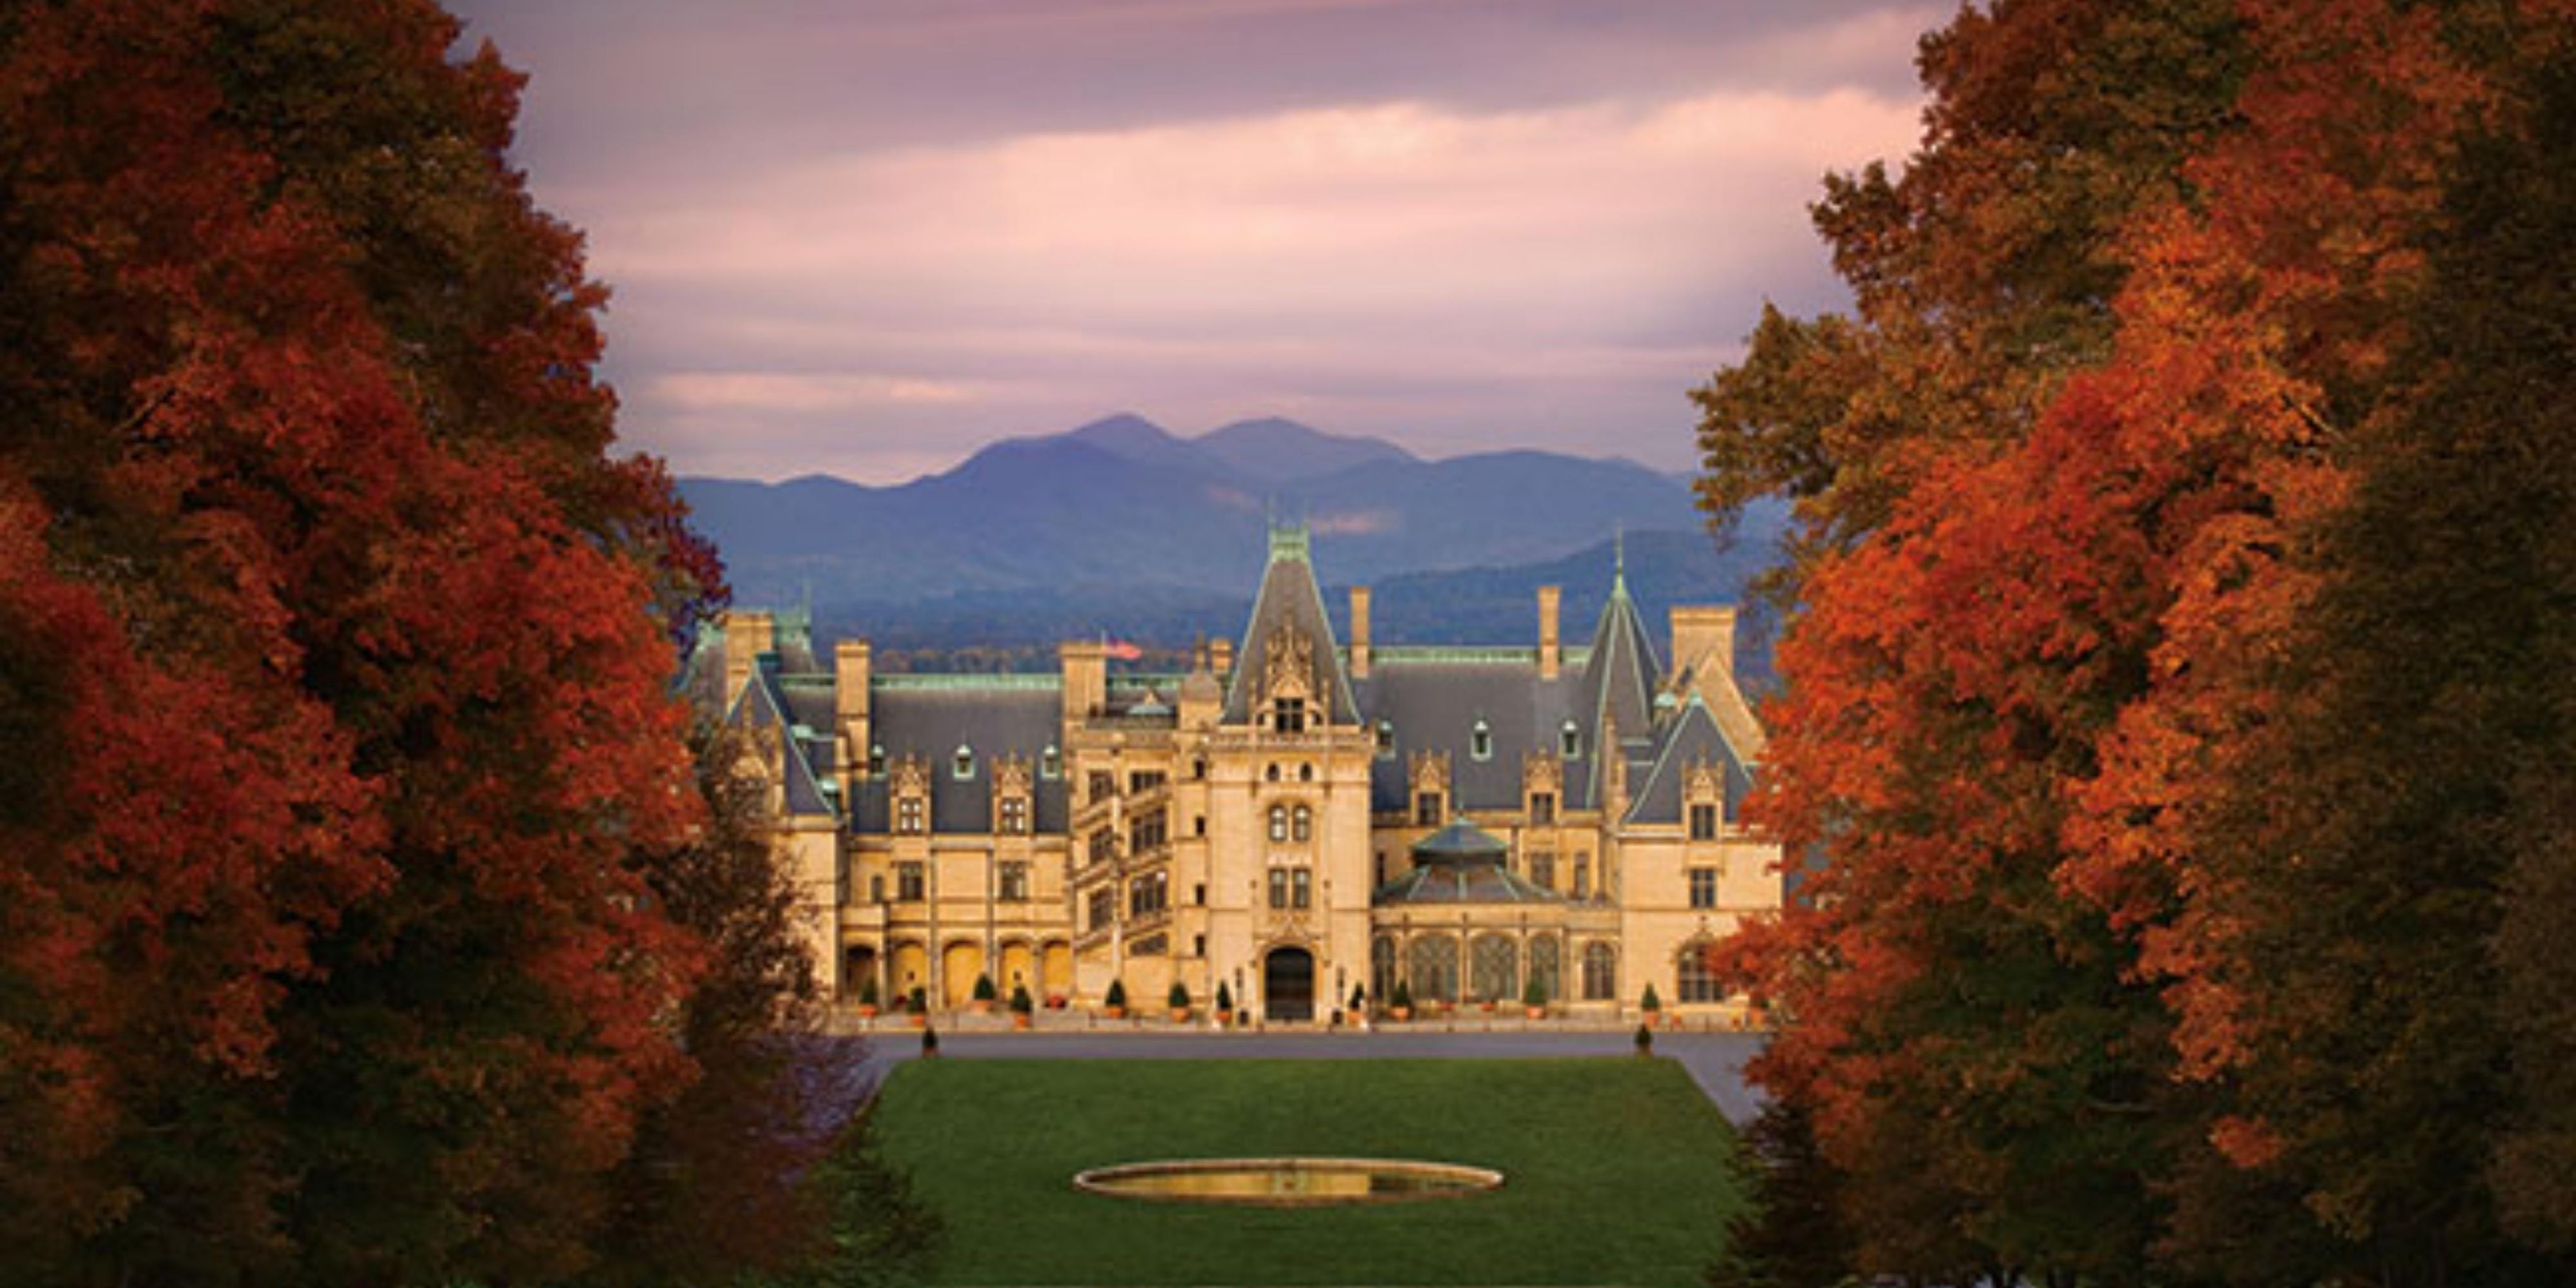 The vibrant fall colors are calling your name! Plan your trip to visit the breathtaking Biltmore Estate during your next stay with us - it's just a short 5 miles away. Plus, ask the front desk for information on discounted tickets.